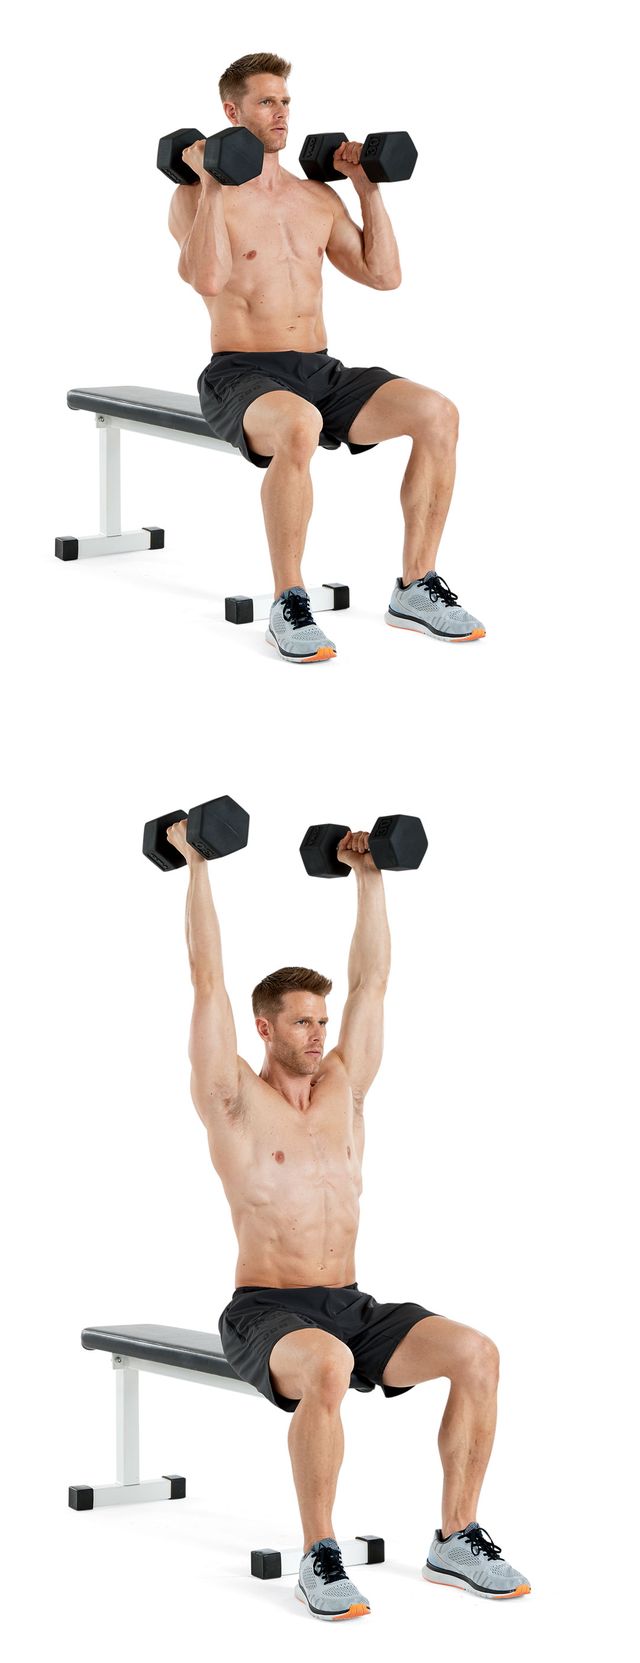 Weights, Exercise equipment, Shoulder, Dumbbell, Arm, Joint, Free weight bar, Muscle, Fitness professional, Chest, 